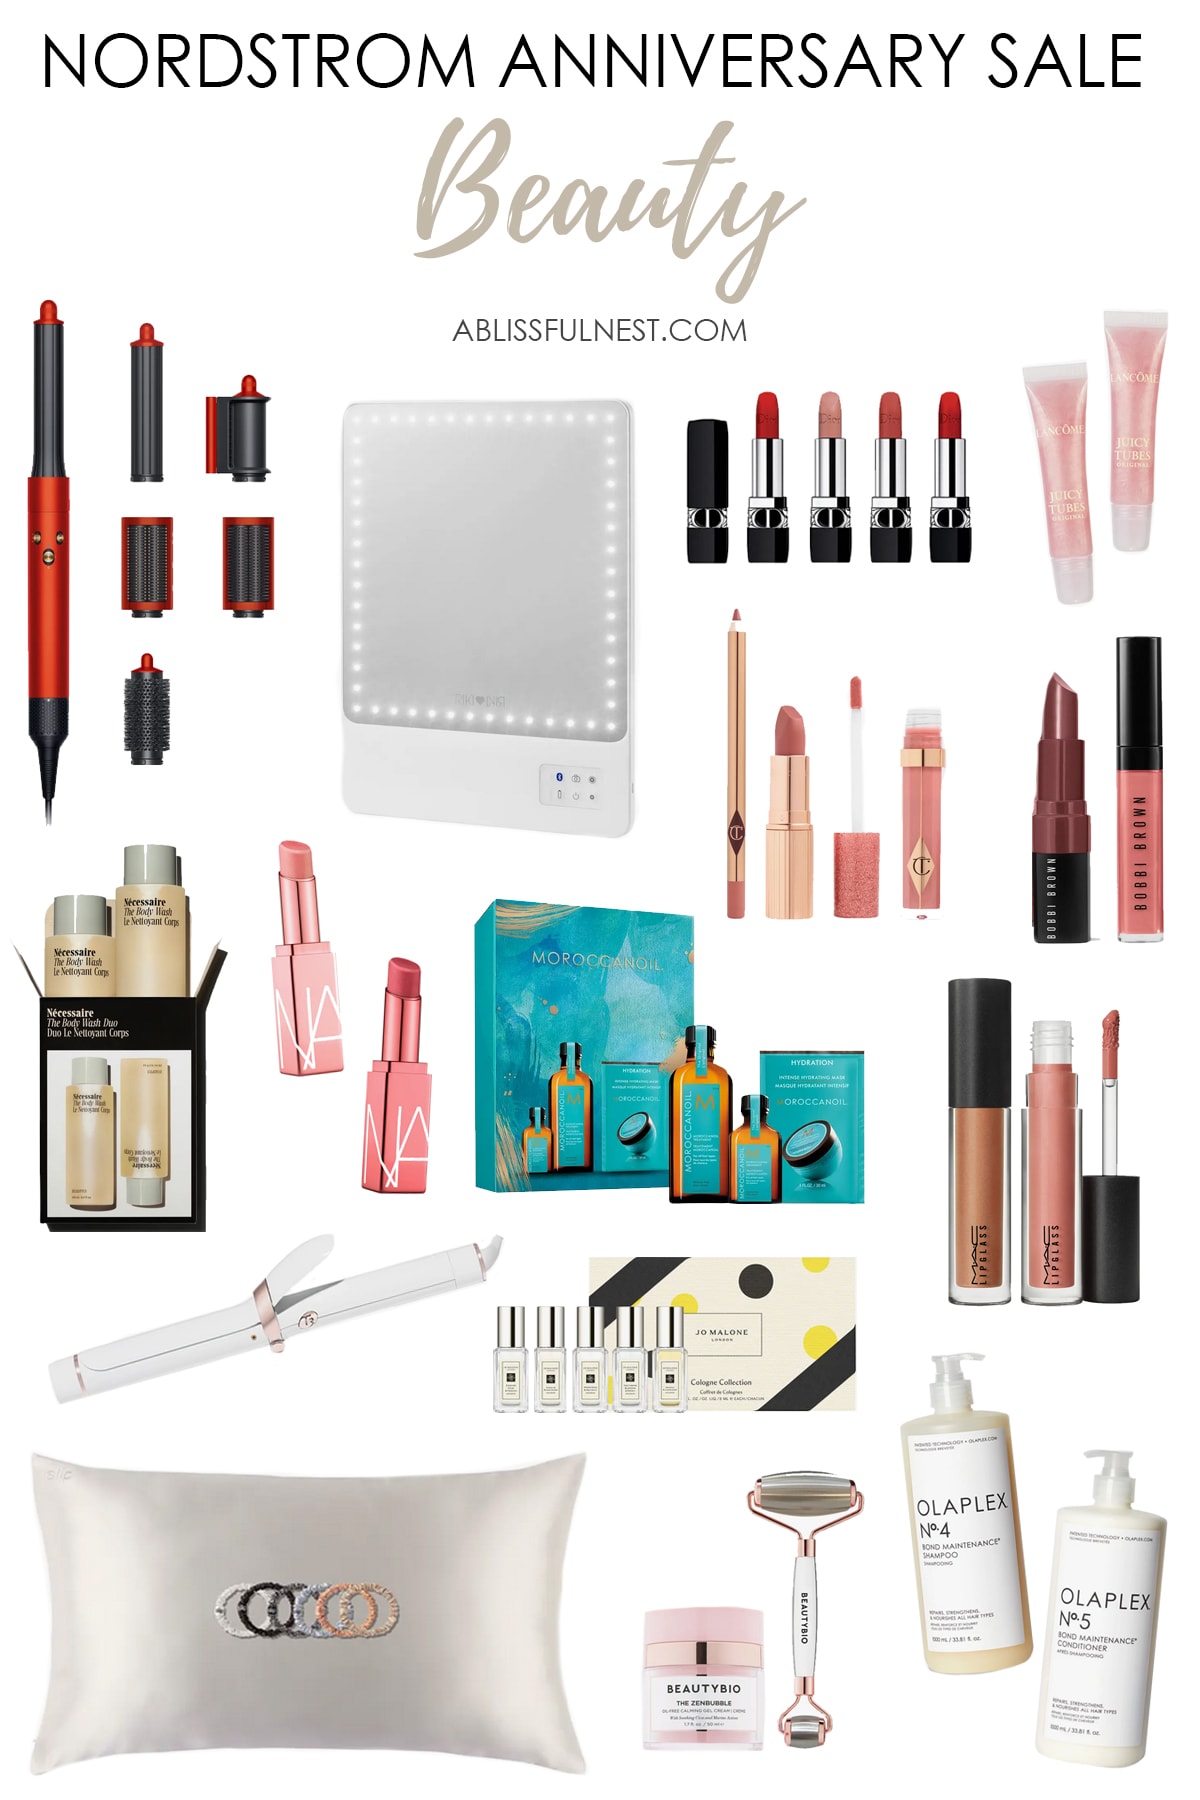 Nordstrom Anniversary Sale beauty exclusives! #ABlissfulNest